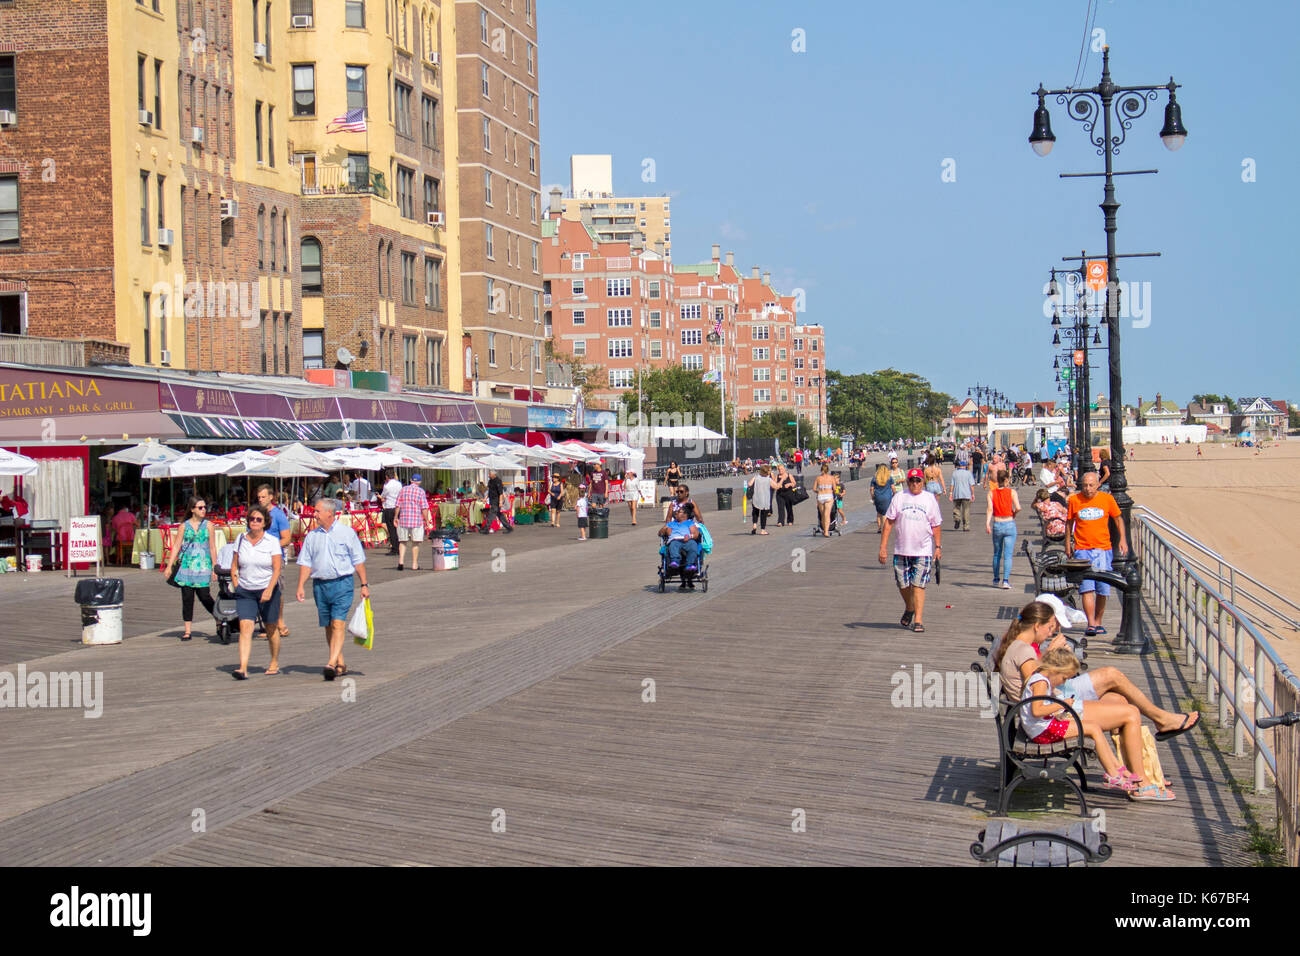 The Brighton Beach area of Brooklyn, known for the Russian immigrants who live here. Stock Photo